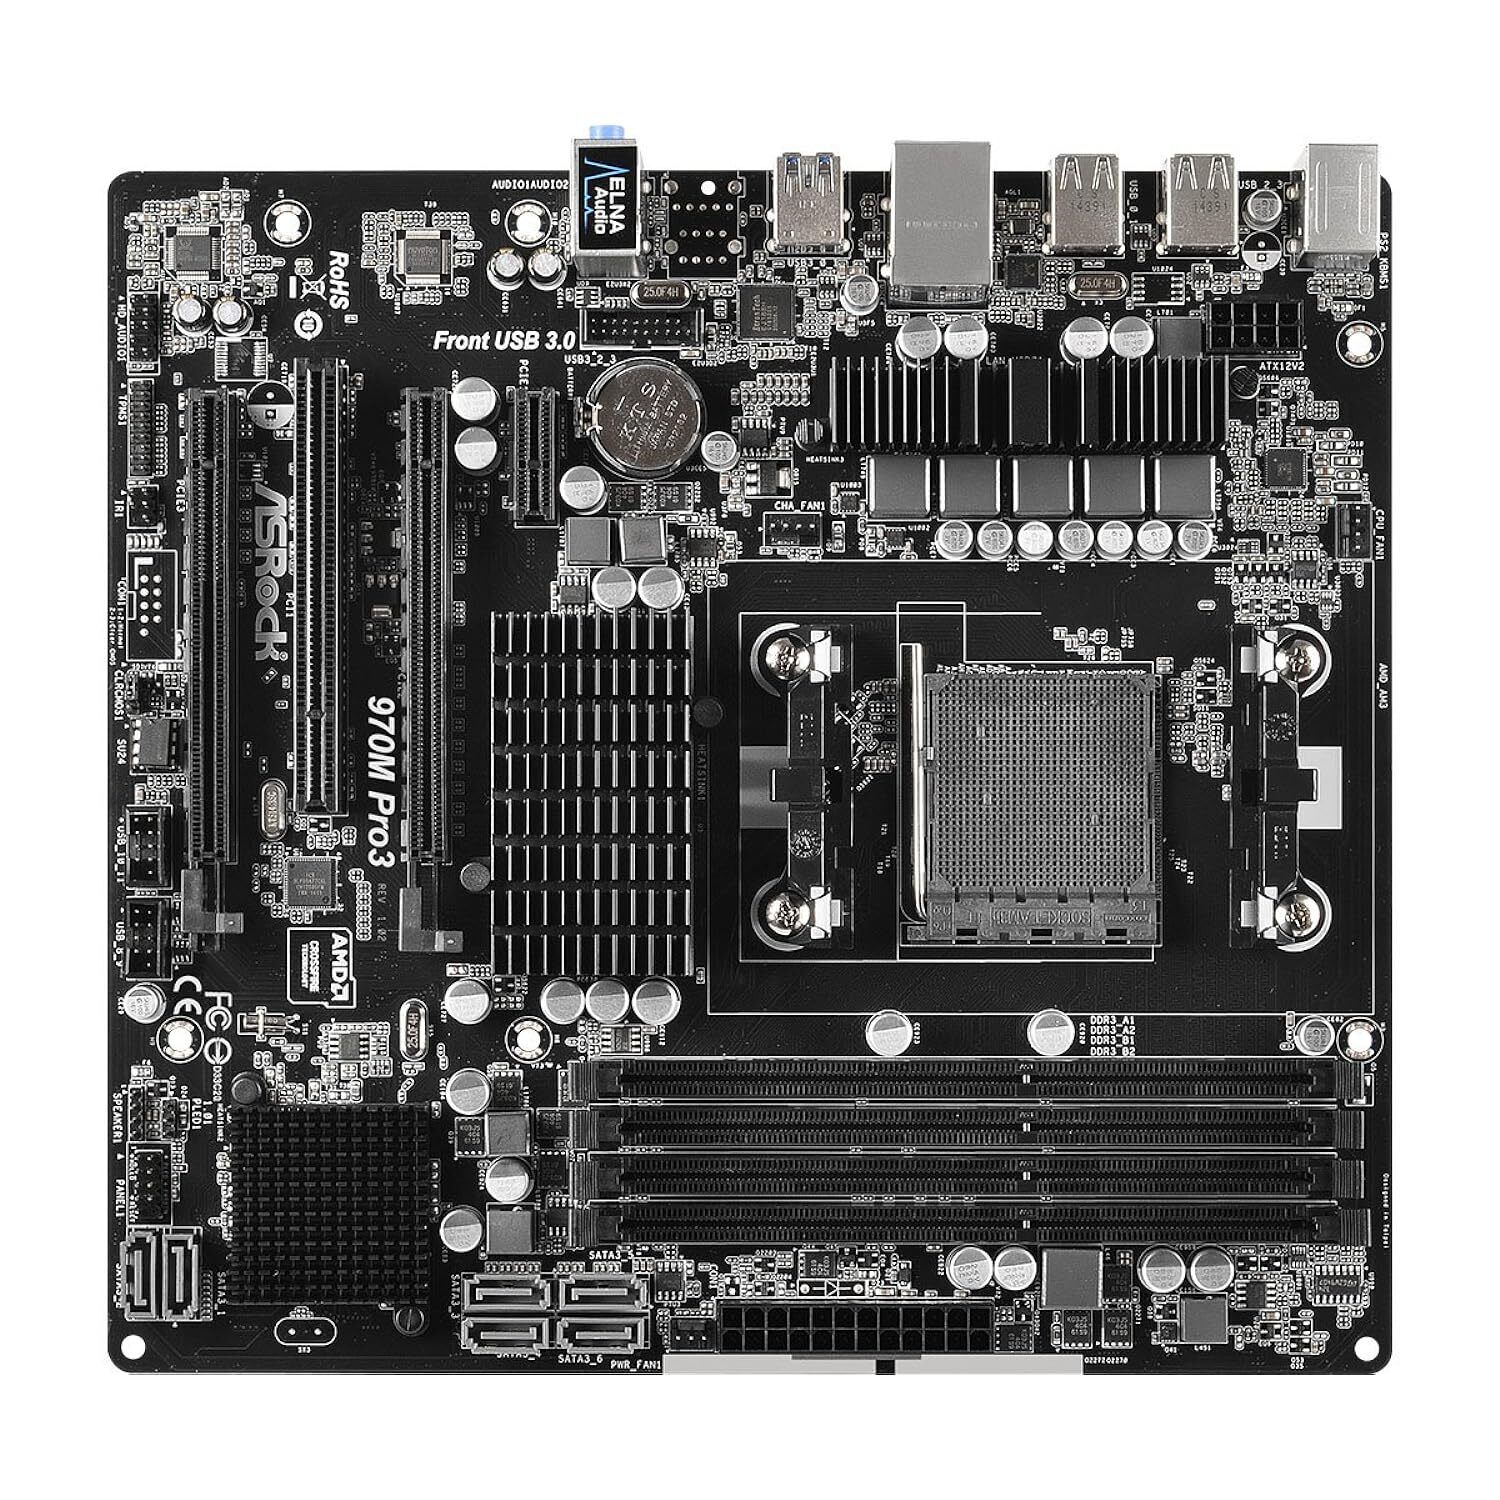 ASRock Micro ATX DDR3 1066 Motherboards 970M PRO3